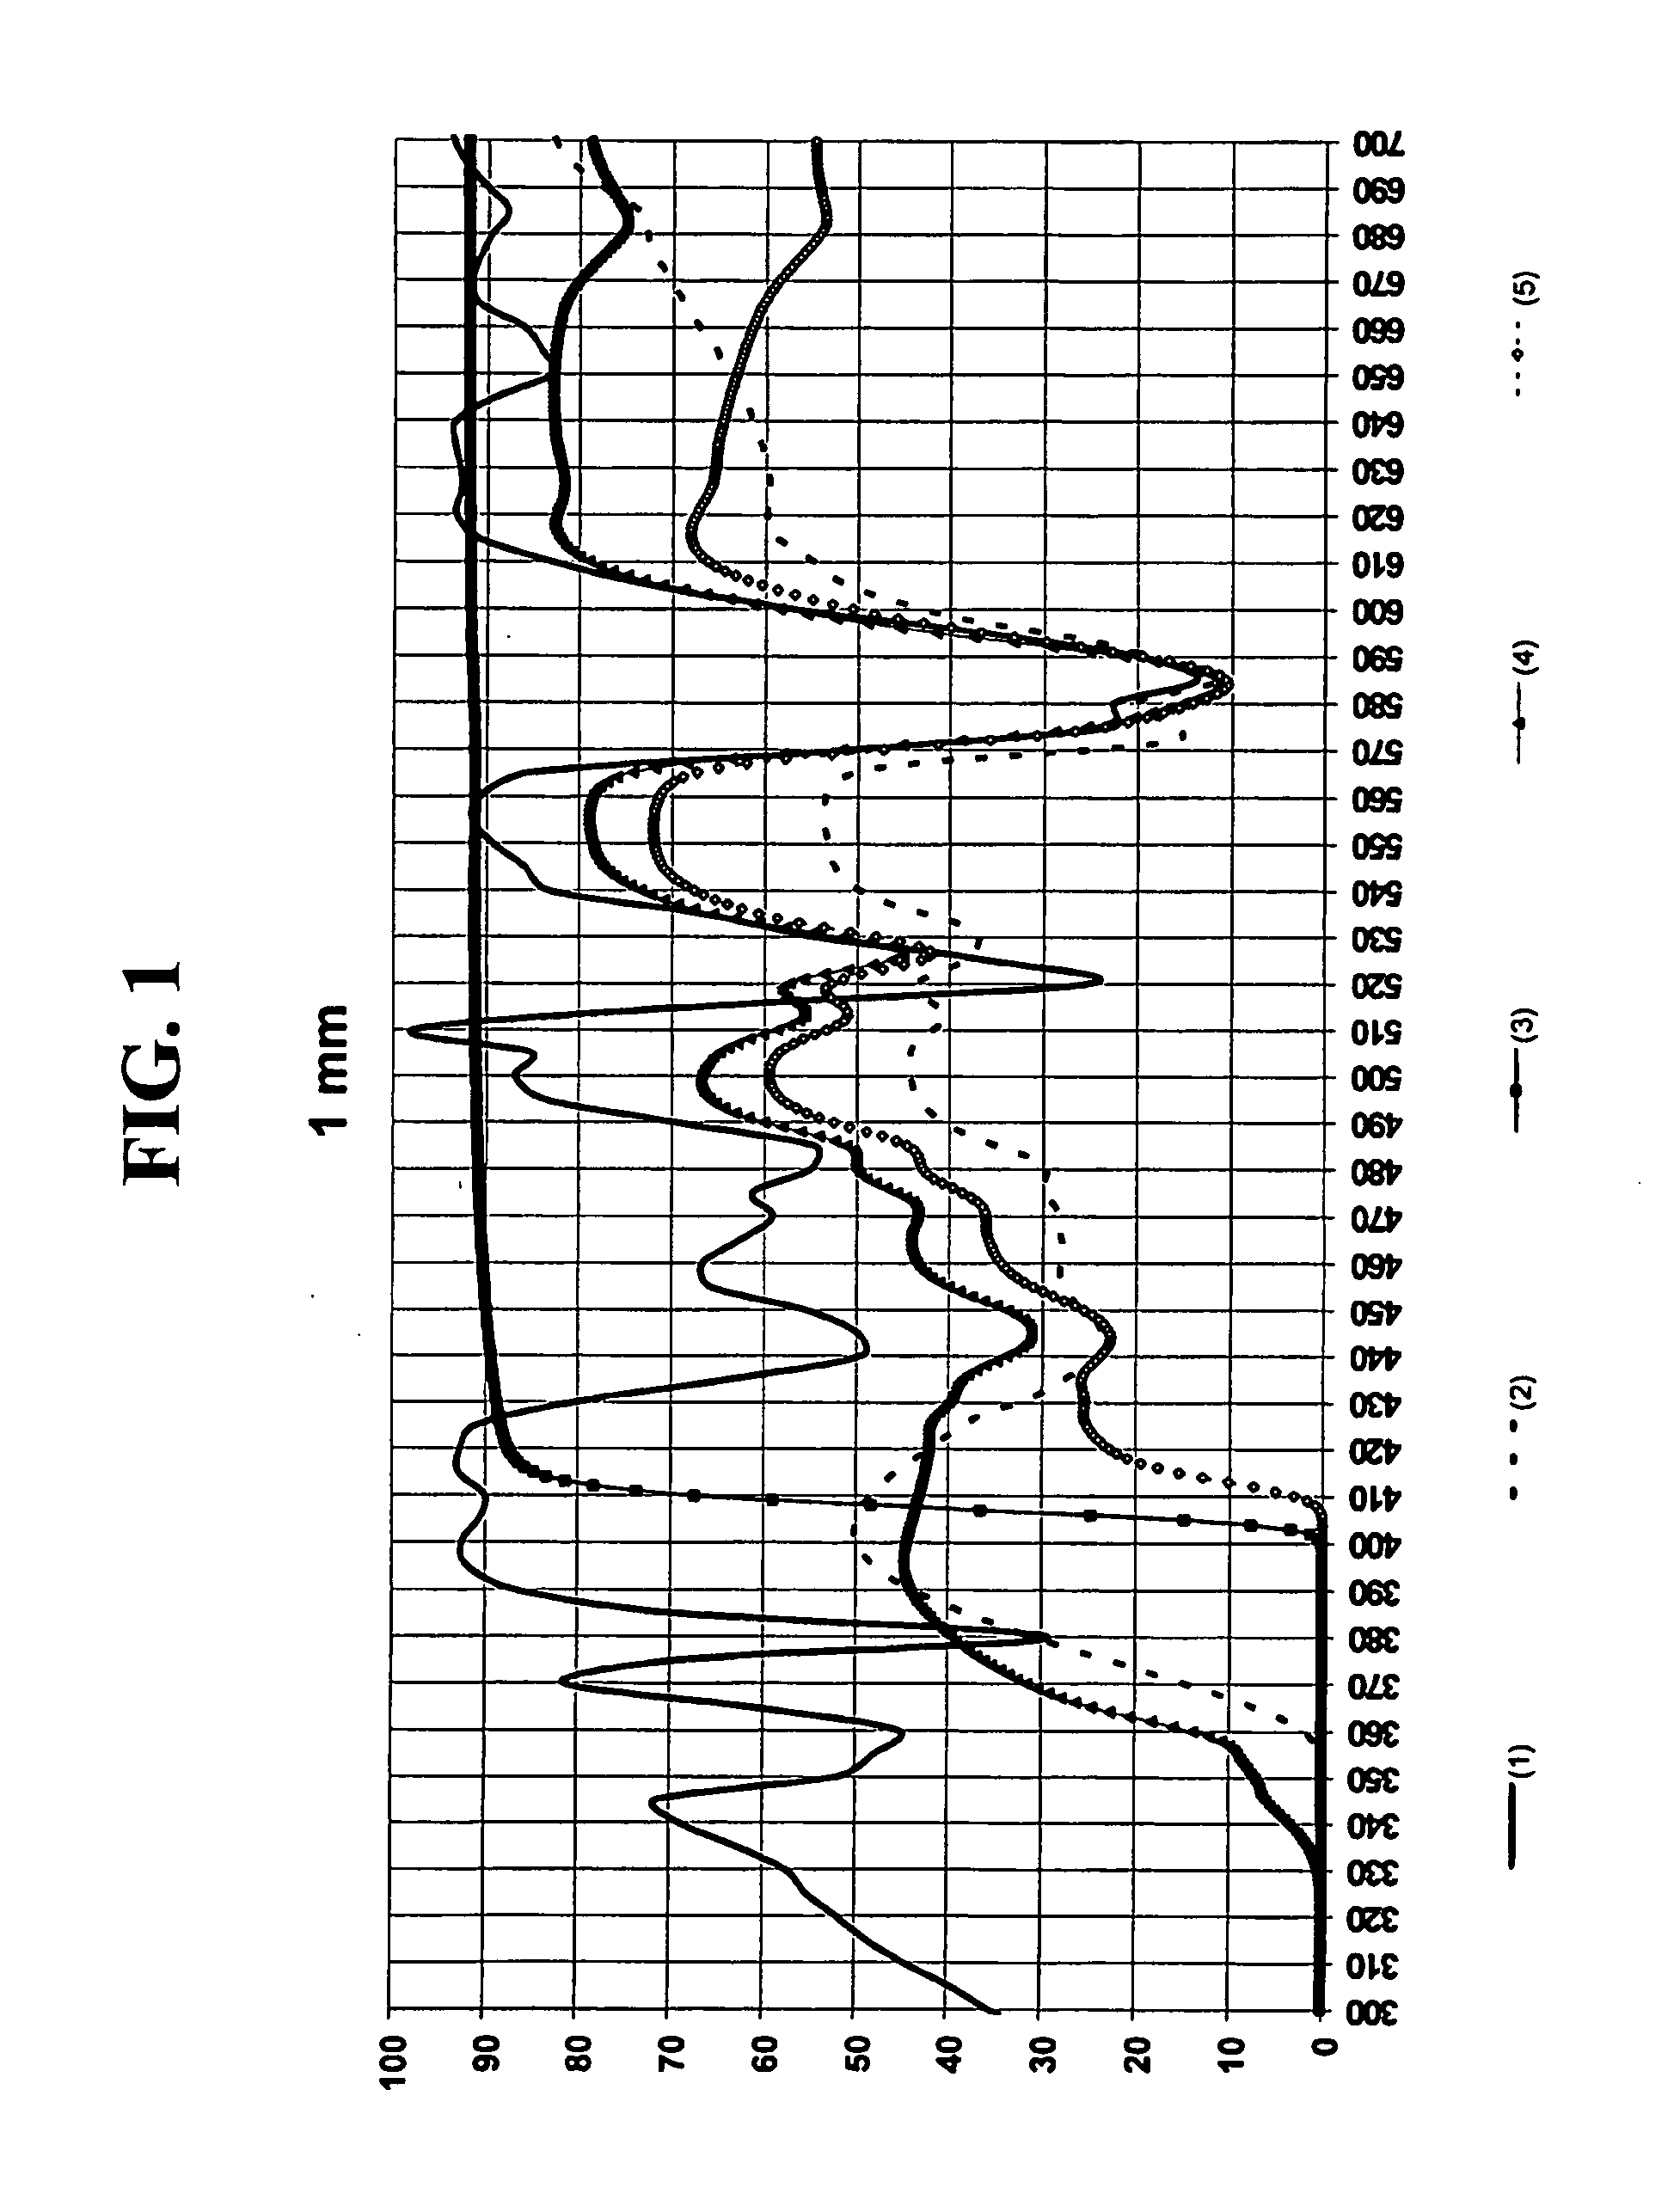 Contrast-Enhancing UV-Absorbing Glass and Articles Containing Same